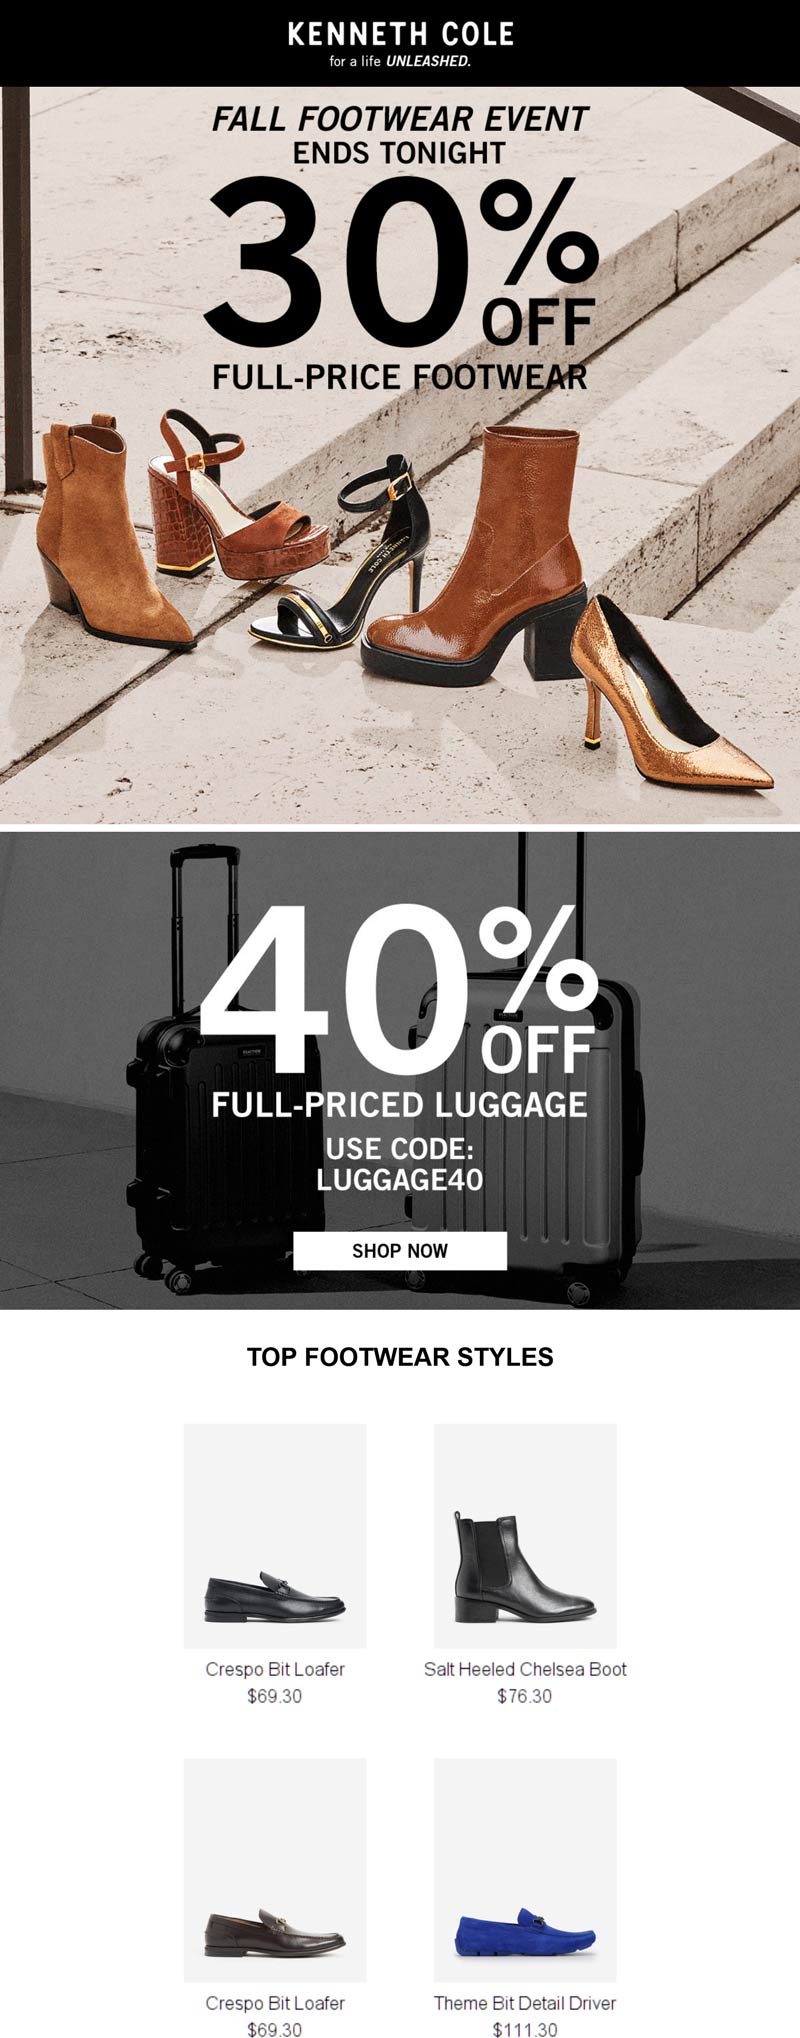 Kenneth Cole stores Coupon  30% off footwear & 40% off luggage today at Kenneth Cole #kennethcole 